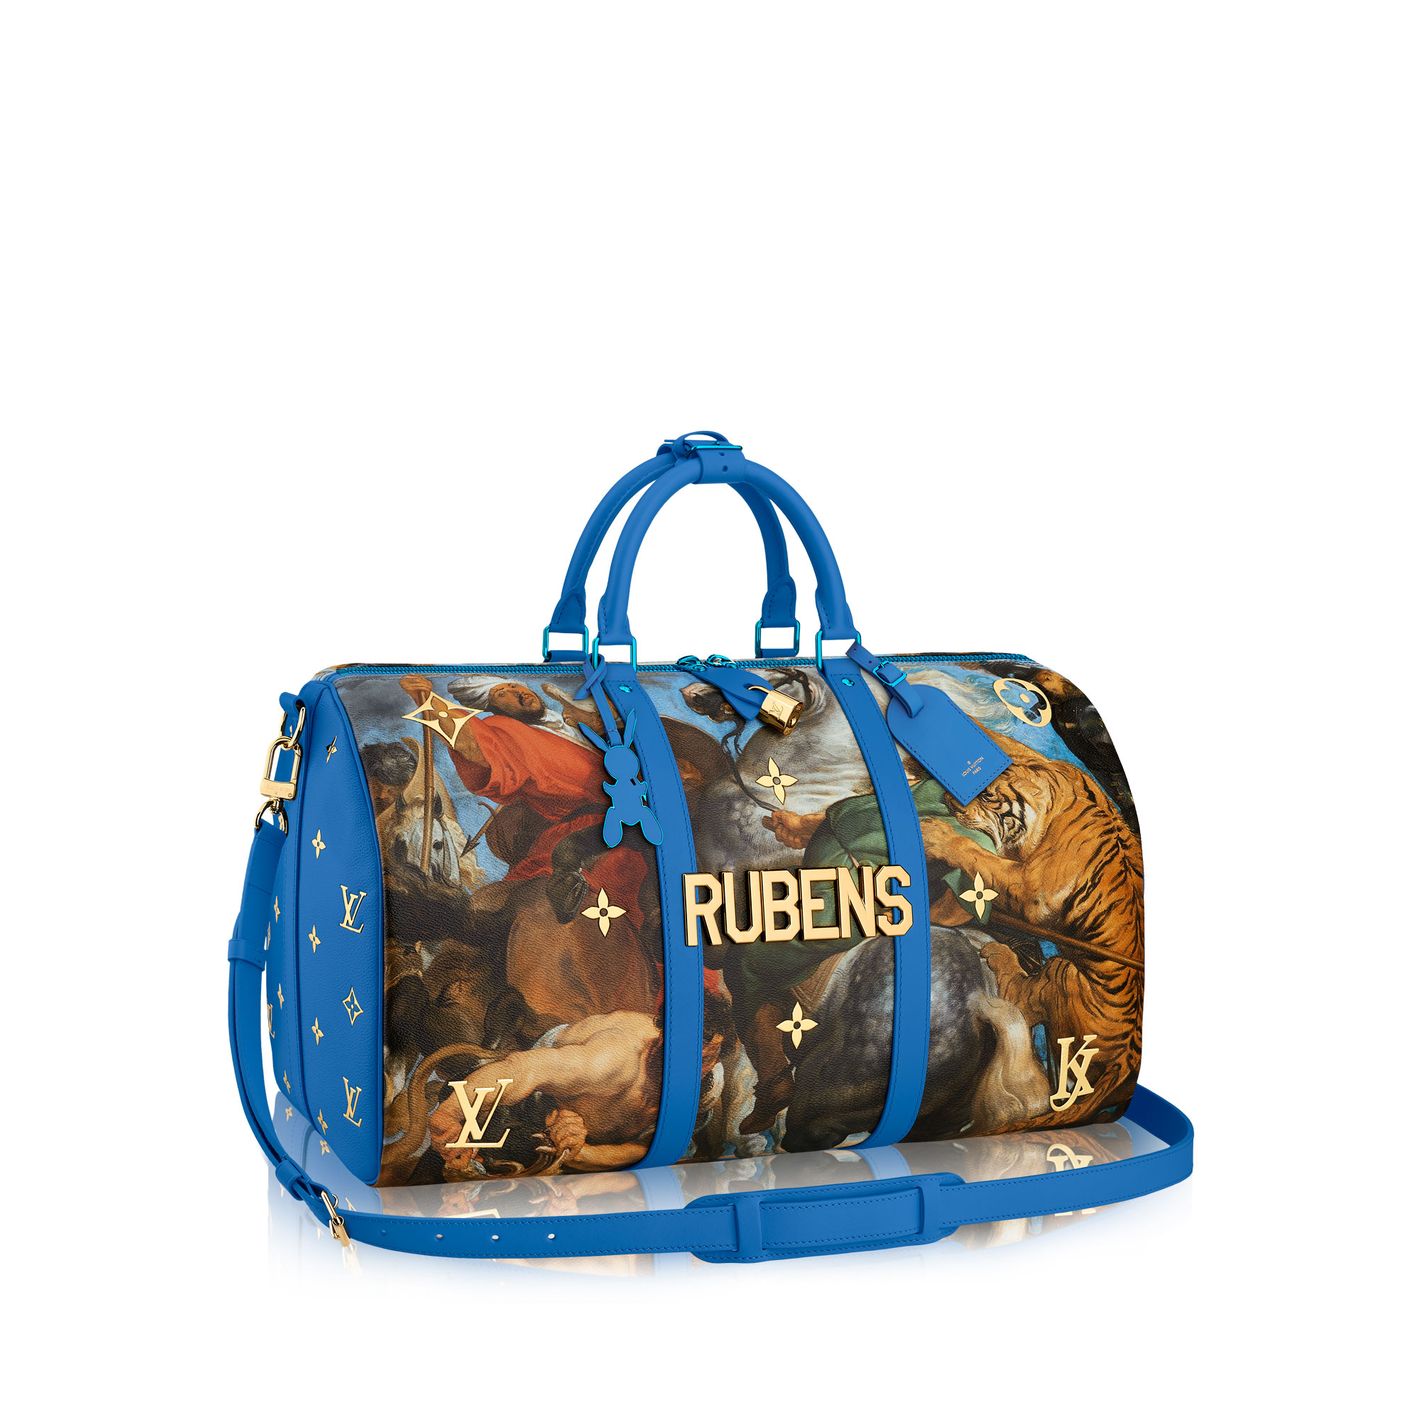 Jeff Koons and Louis Vuitton Collaborate on Handbags